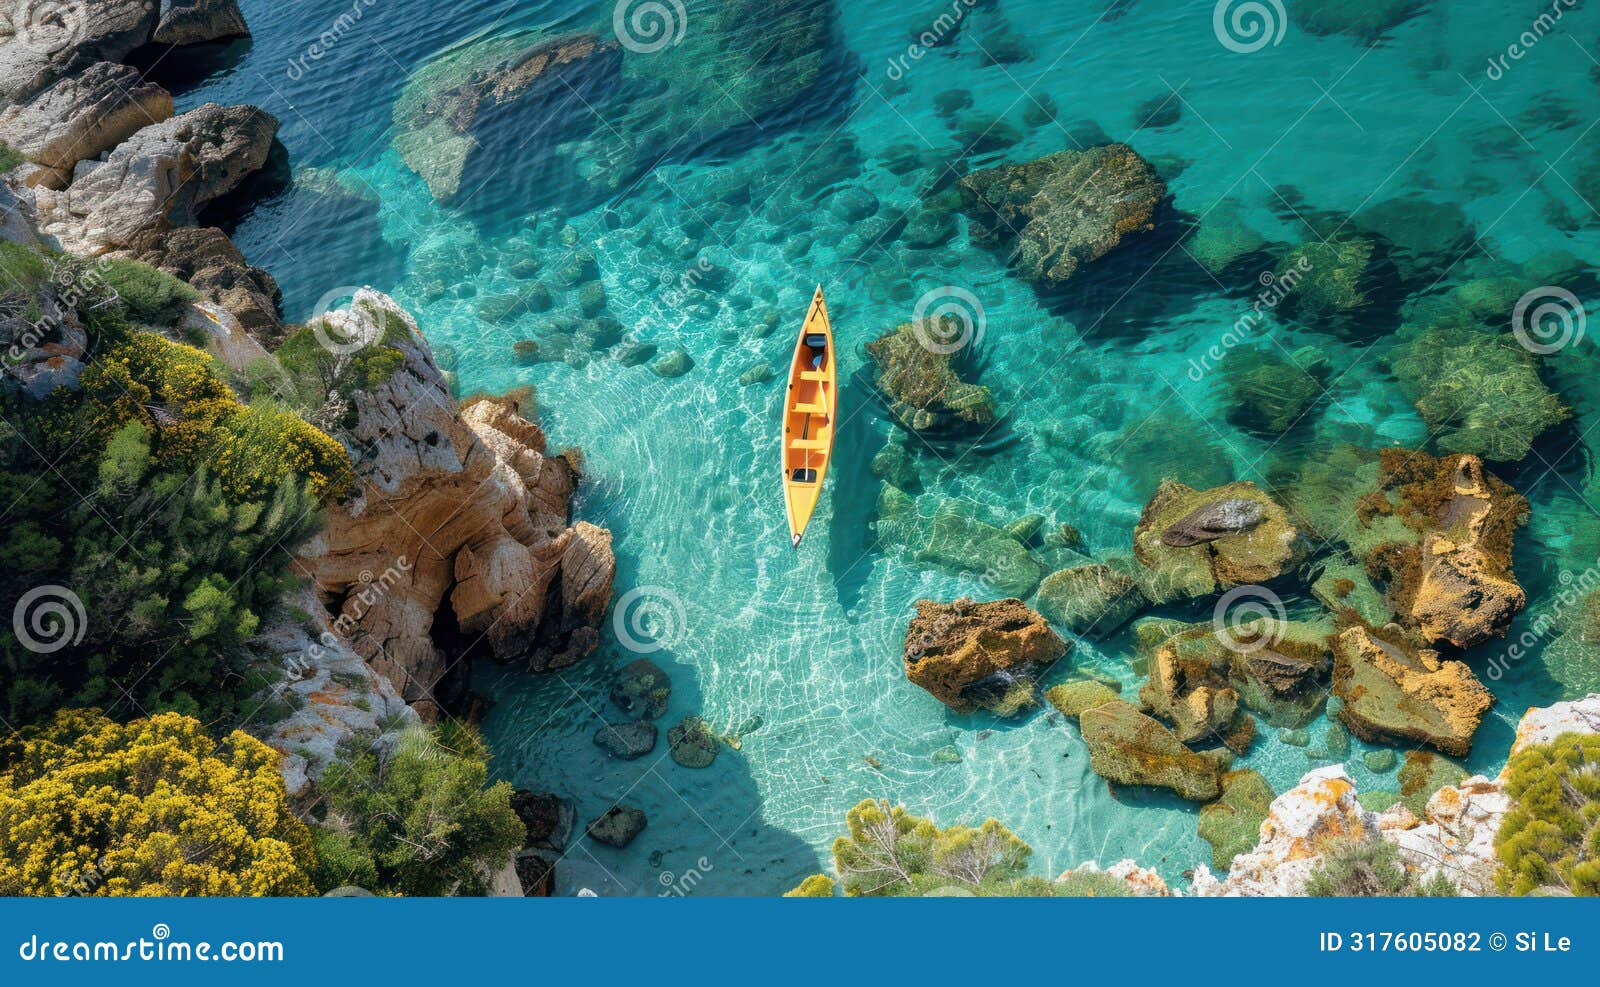 serene canoeing on crystal clear waters of san vito lo capo, sicily, italy - aerial view